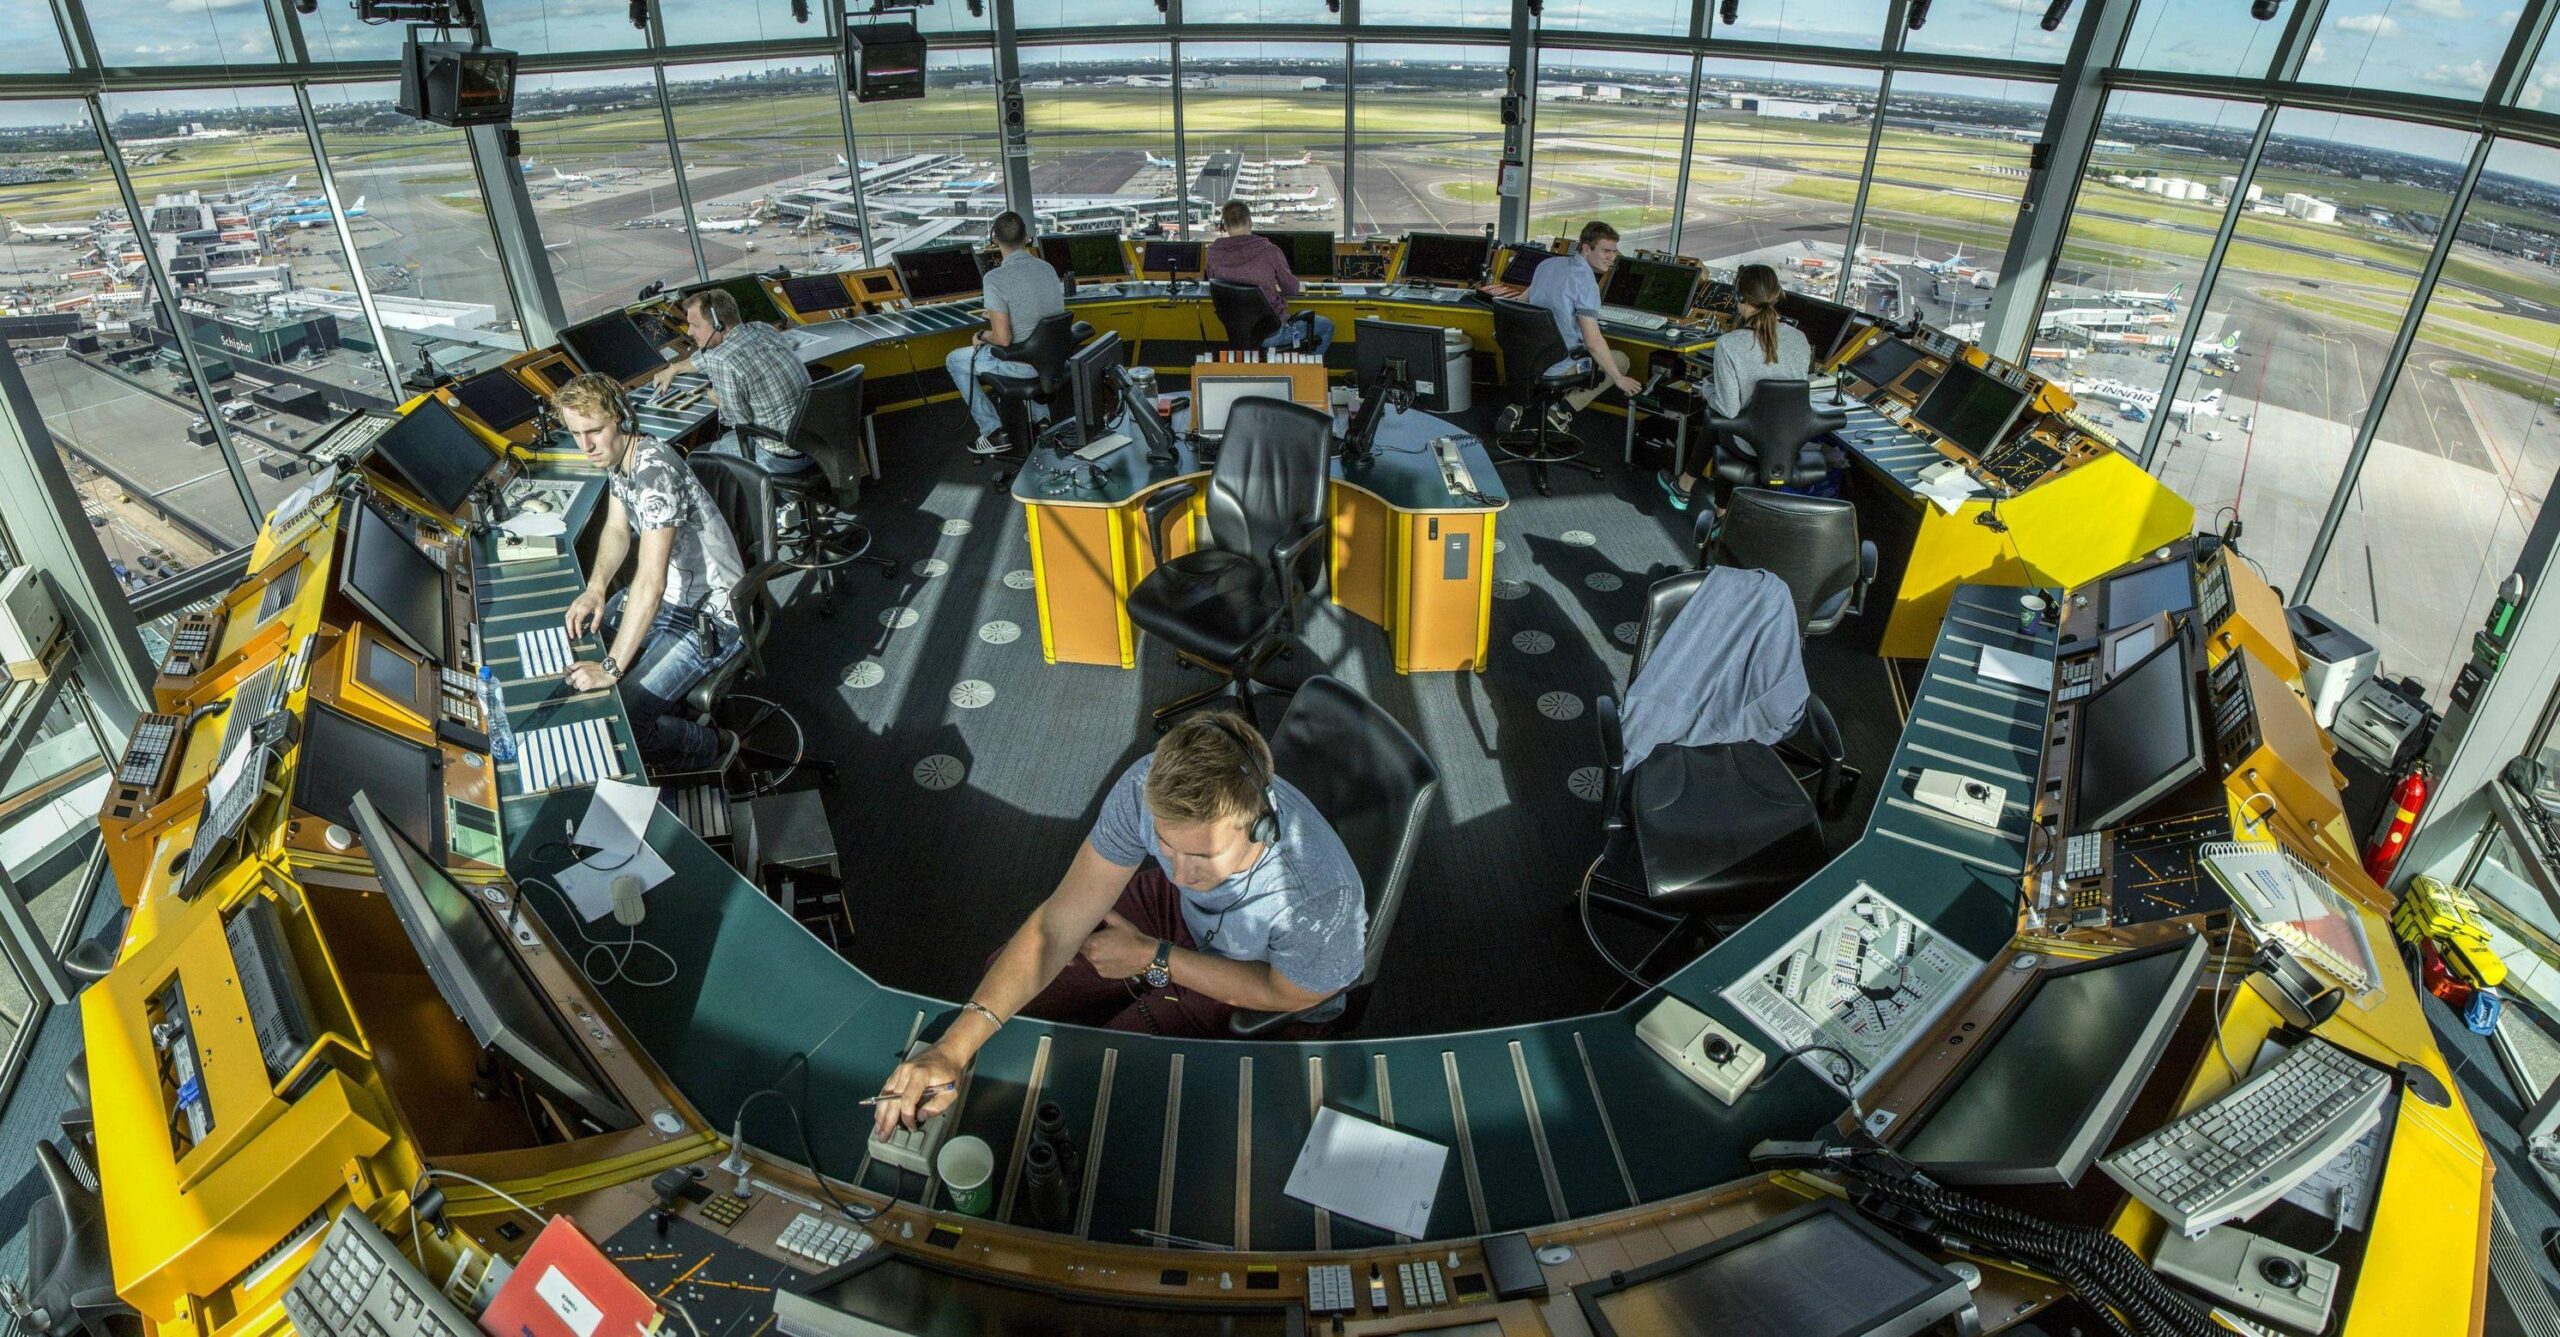 ATC VS PILOTS: The Battle for the Skies